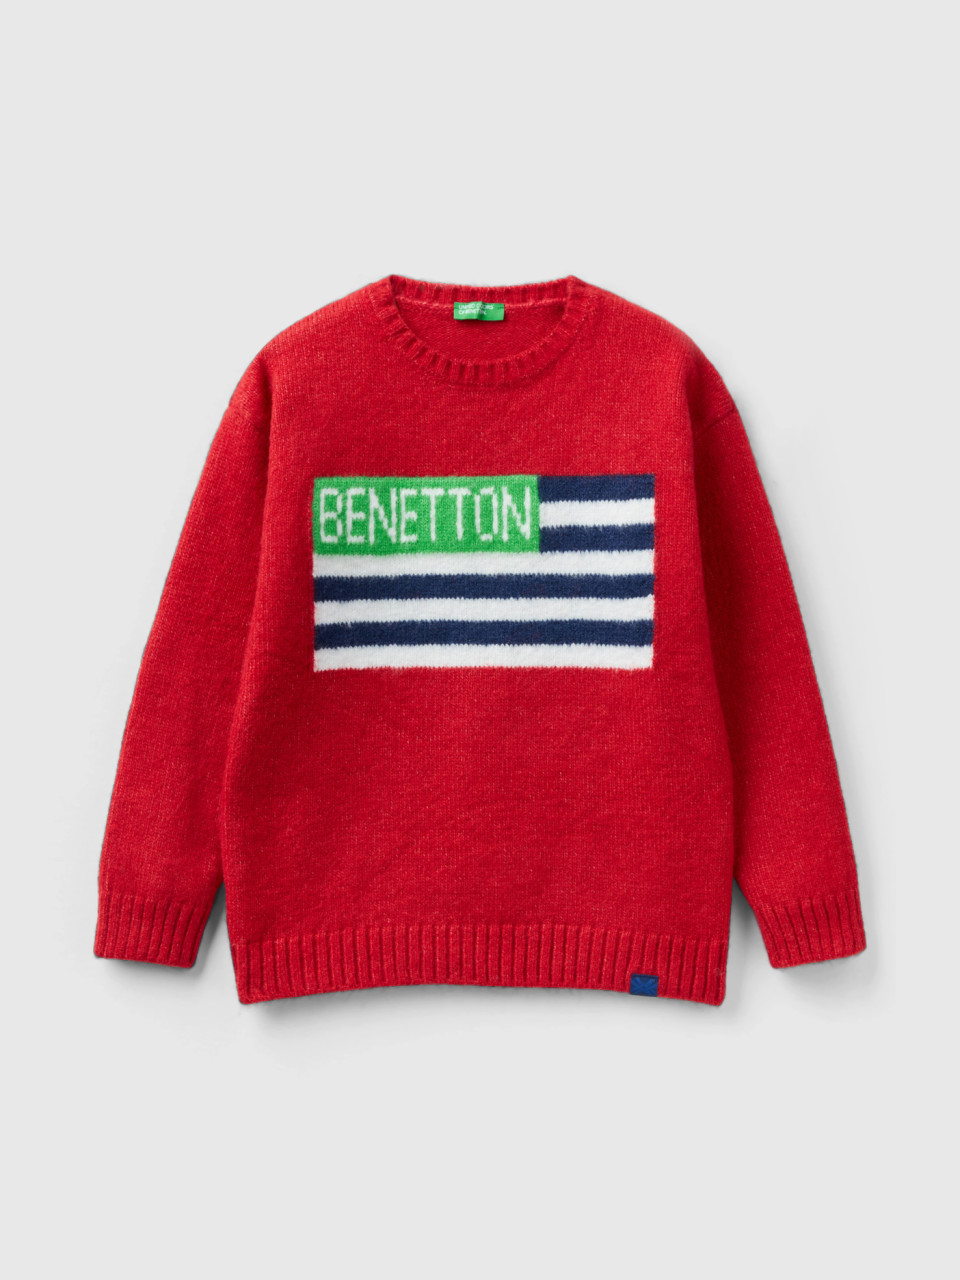 Benetton, Sweater With Flag Inlay, Red, Kids